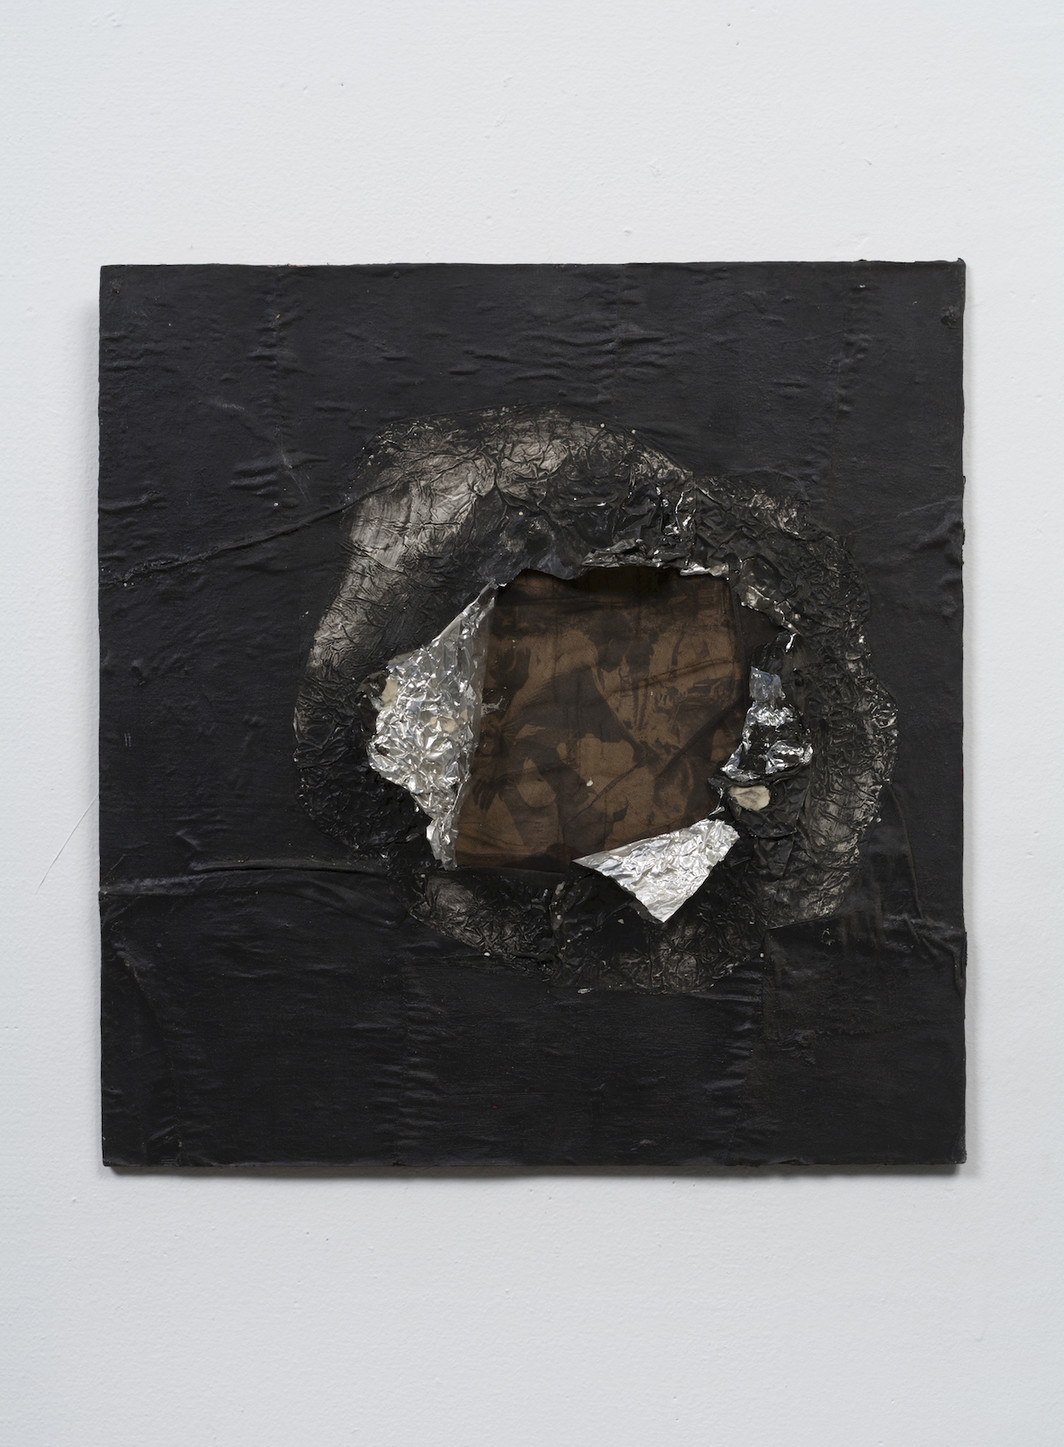 Jack Whitten, Birmingham, 1964. Aluminum foil, newsprint, stocking, and oil on plywood 16 5/8 x 16 in (42.2 x 40.6 cm). Collection Joel Wachs. © Courtesy the Jack Whitten Estate and Hauser & Wirth